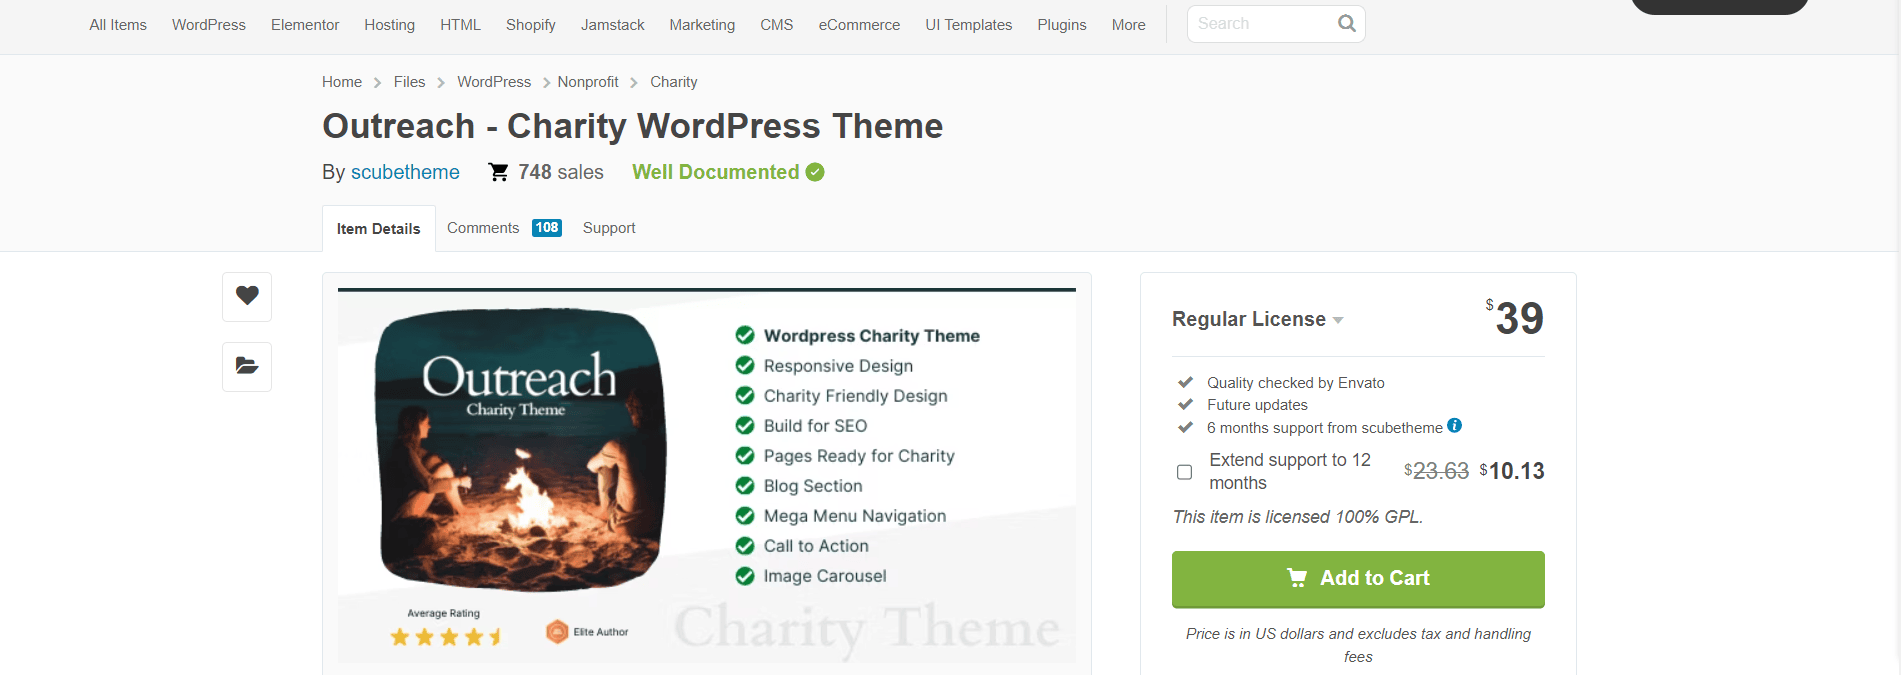 Webpage showcasing 'Outreach - Charity WordPress Theme' with a preview image featuring a person sitting by a campfire, along with theme details and a purchase option priced at $39.